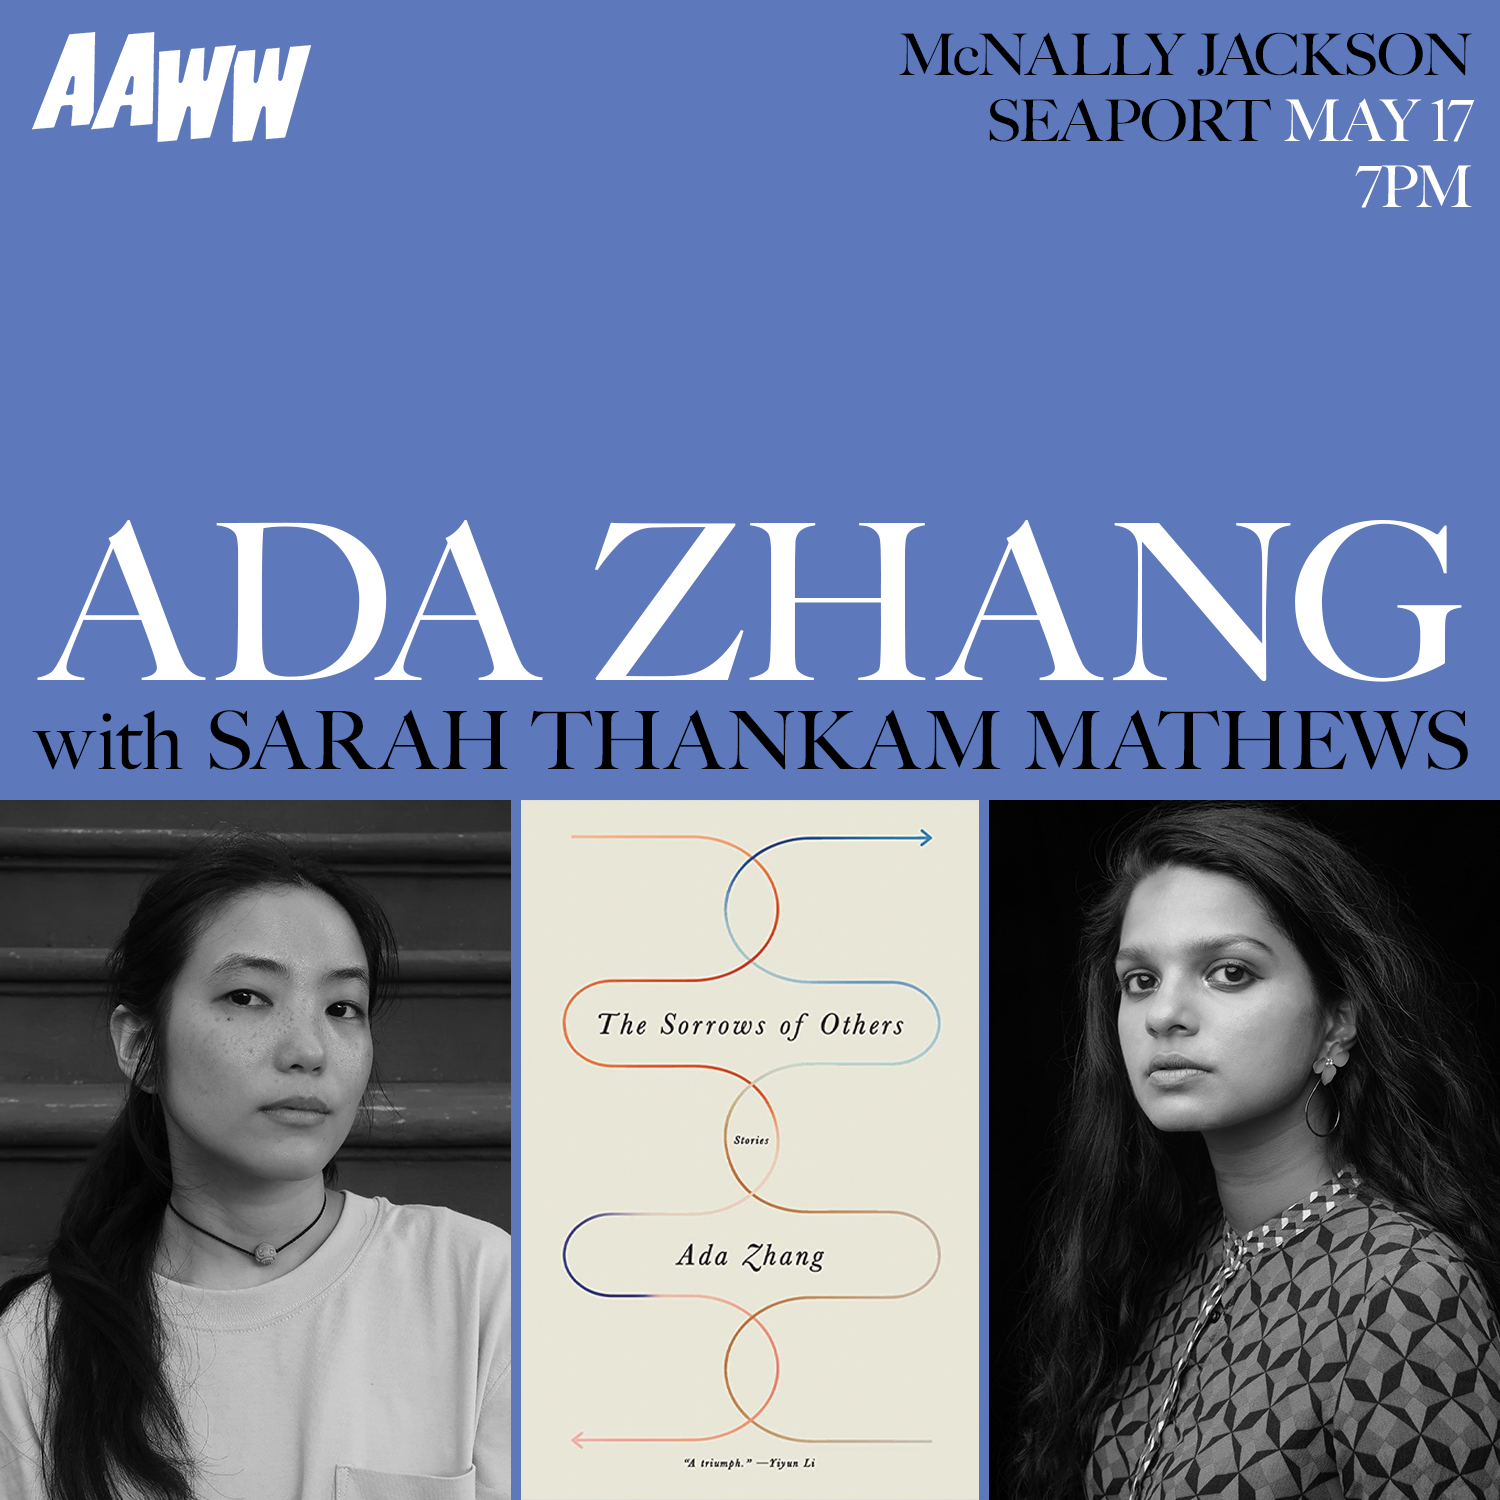 AAWW & McNally Jackson present: Ada Zhang's The Sorrows of Others with Sarah Thankam Mathews